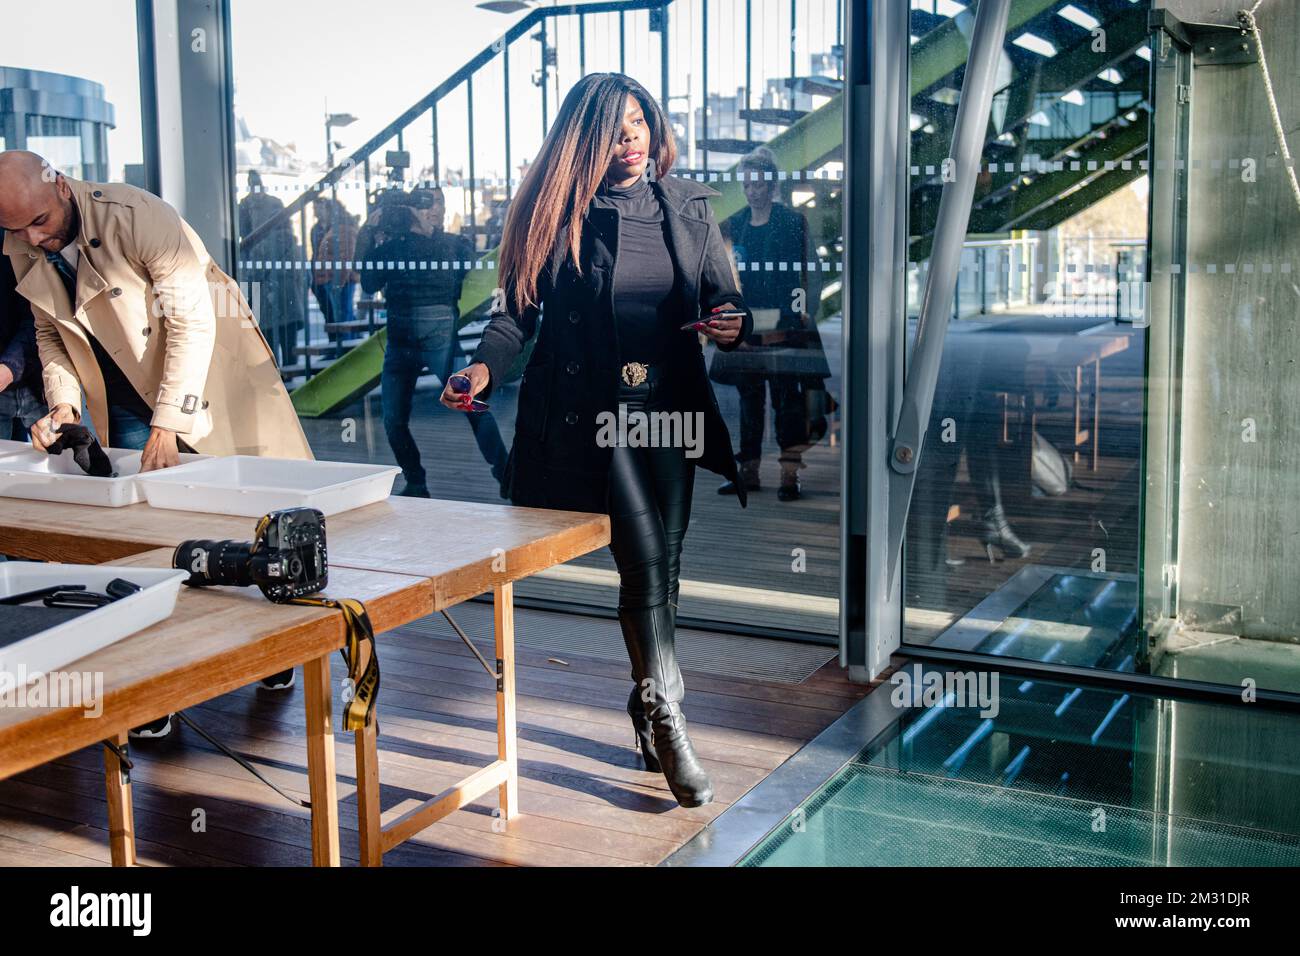 actress Imanuelle Grives arrives for the verdict session of the Antwerp Correctional Court against Dutch actress Imanuelle Grives, accused of dealing drugs, Friday 08 November 2019. The 34-year-old was arrested at the Tomorrowland dance festival with an amount of illegal drugs considered to be for dealing. BELGA PHOTO JONAS ROOSENS Stock Photo